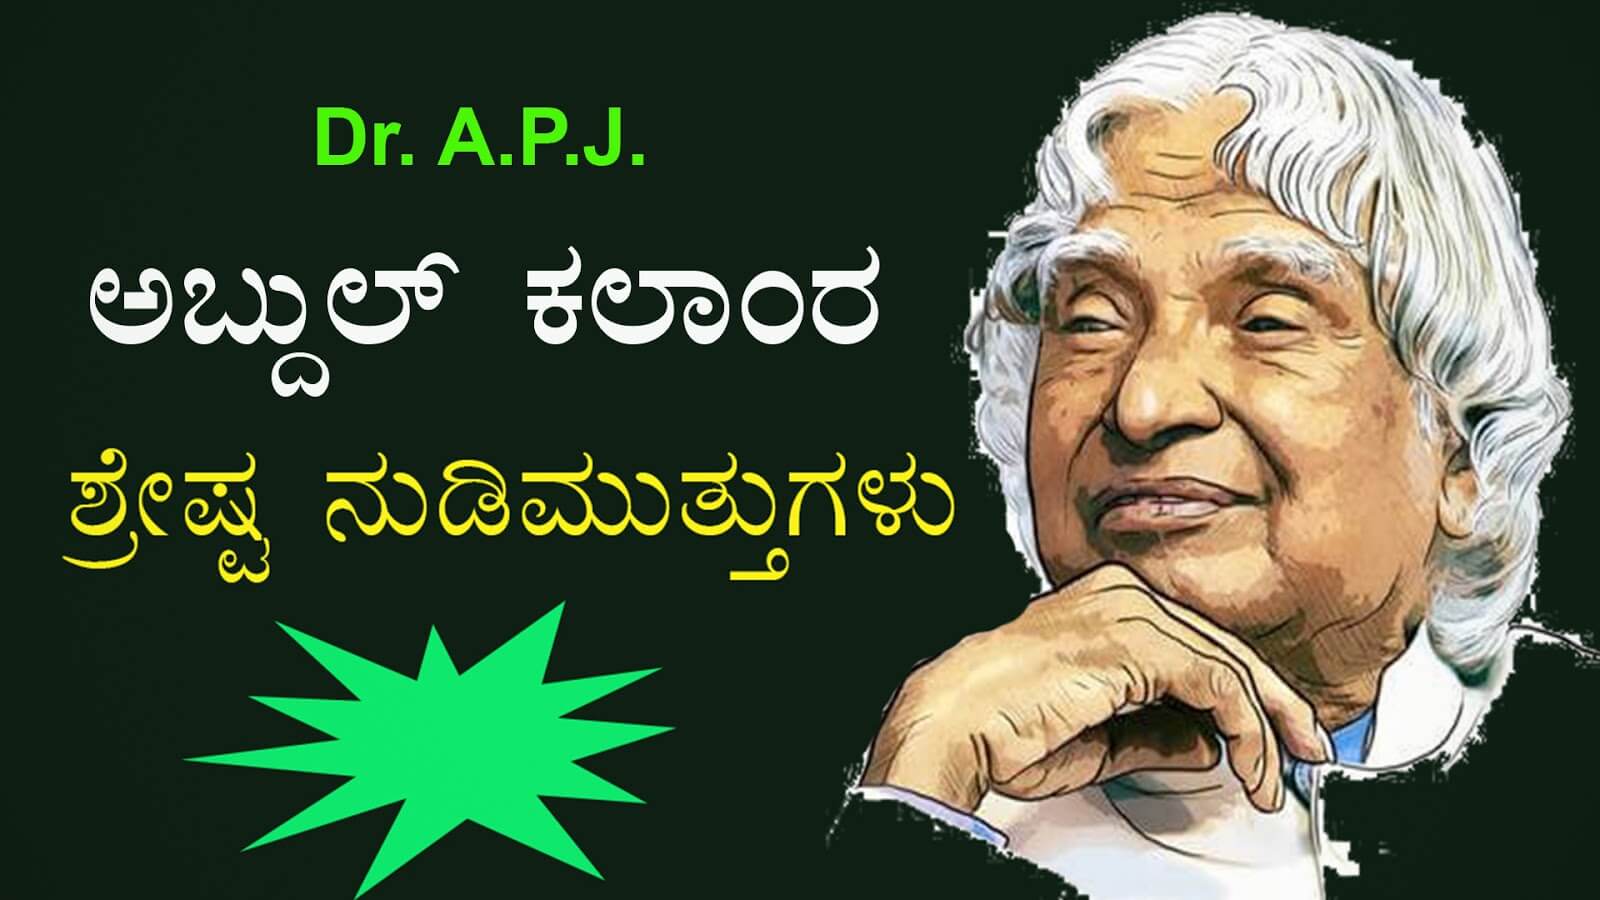 You are currently viewing Dr. A.P.J.  ಅಬ್ದುಲ್ ಕಲಾಂರ ನುಡಿಮುತ್ತುಗಳು – 50 Best Quotes of Dr. A.P.J. Abdul Kalam in Kannada